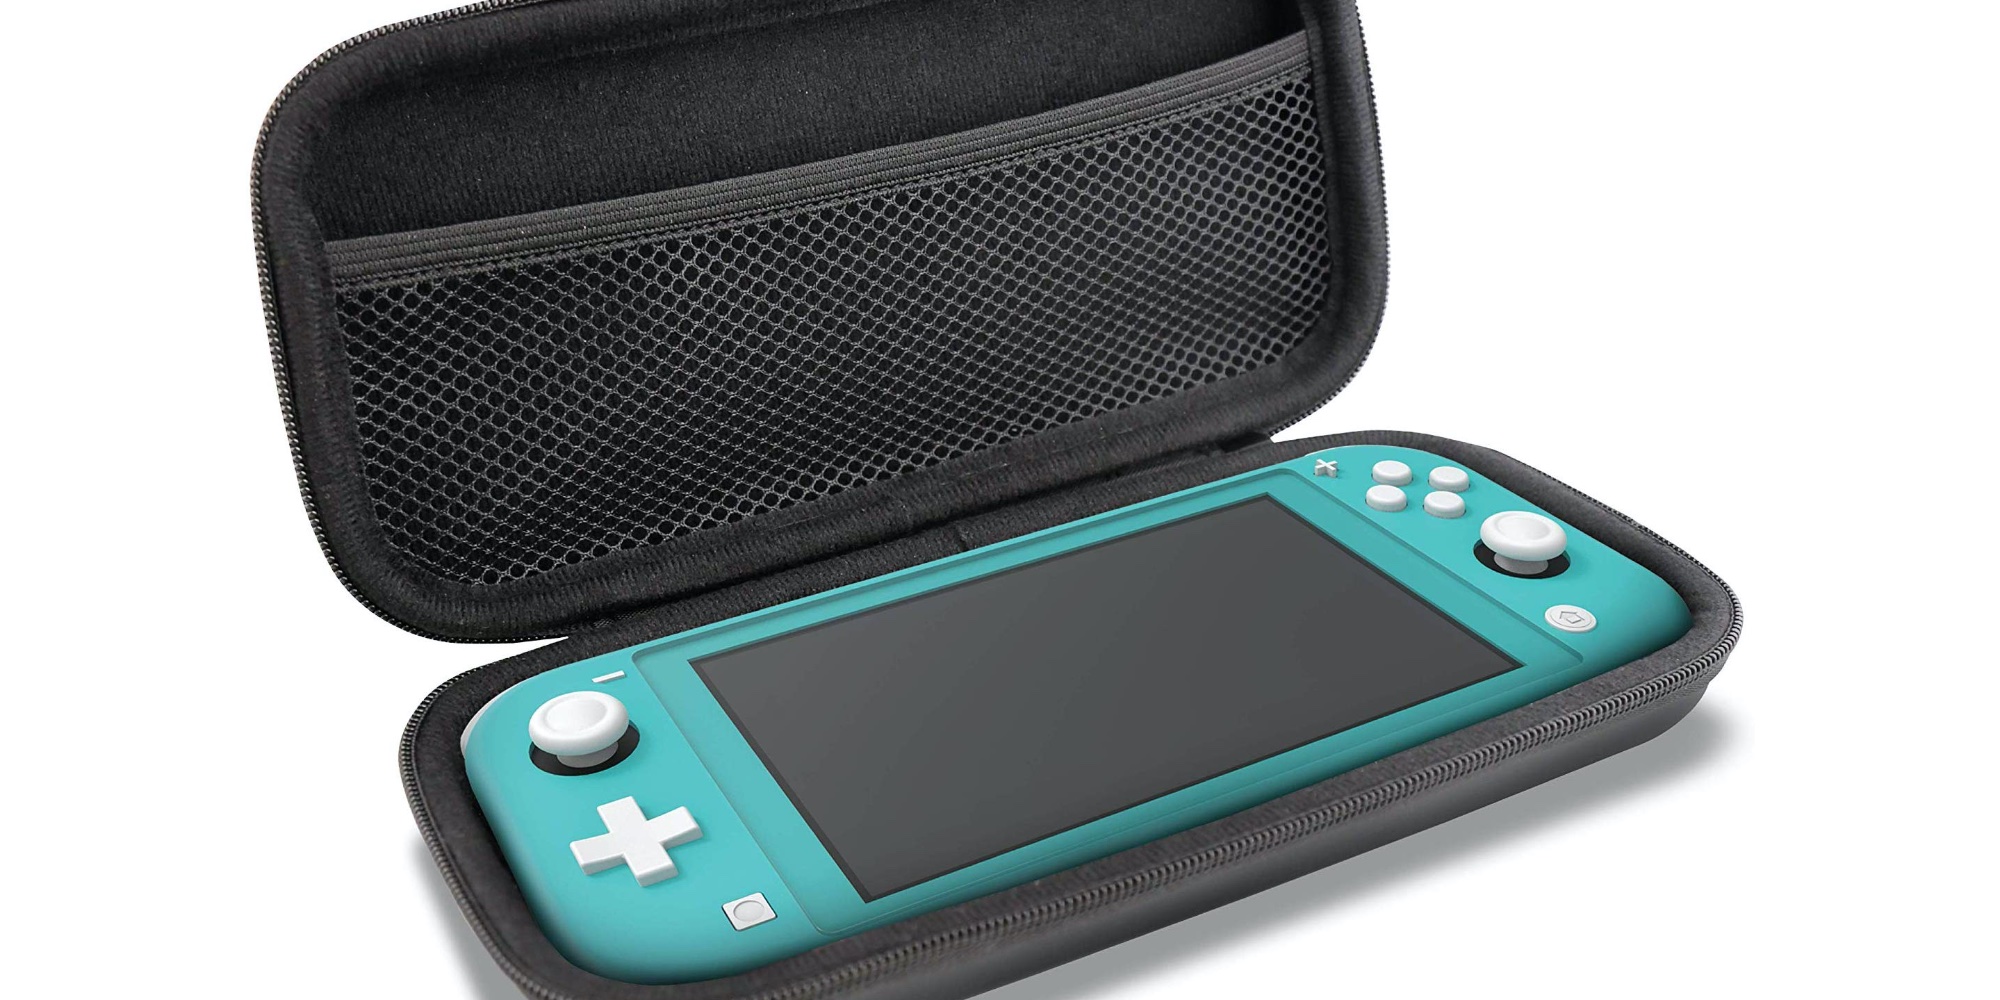 nyko switch screen protector